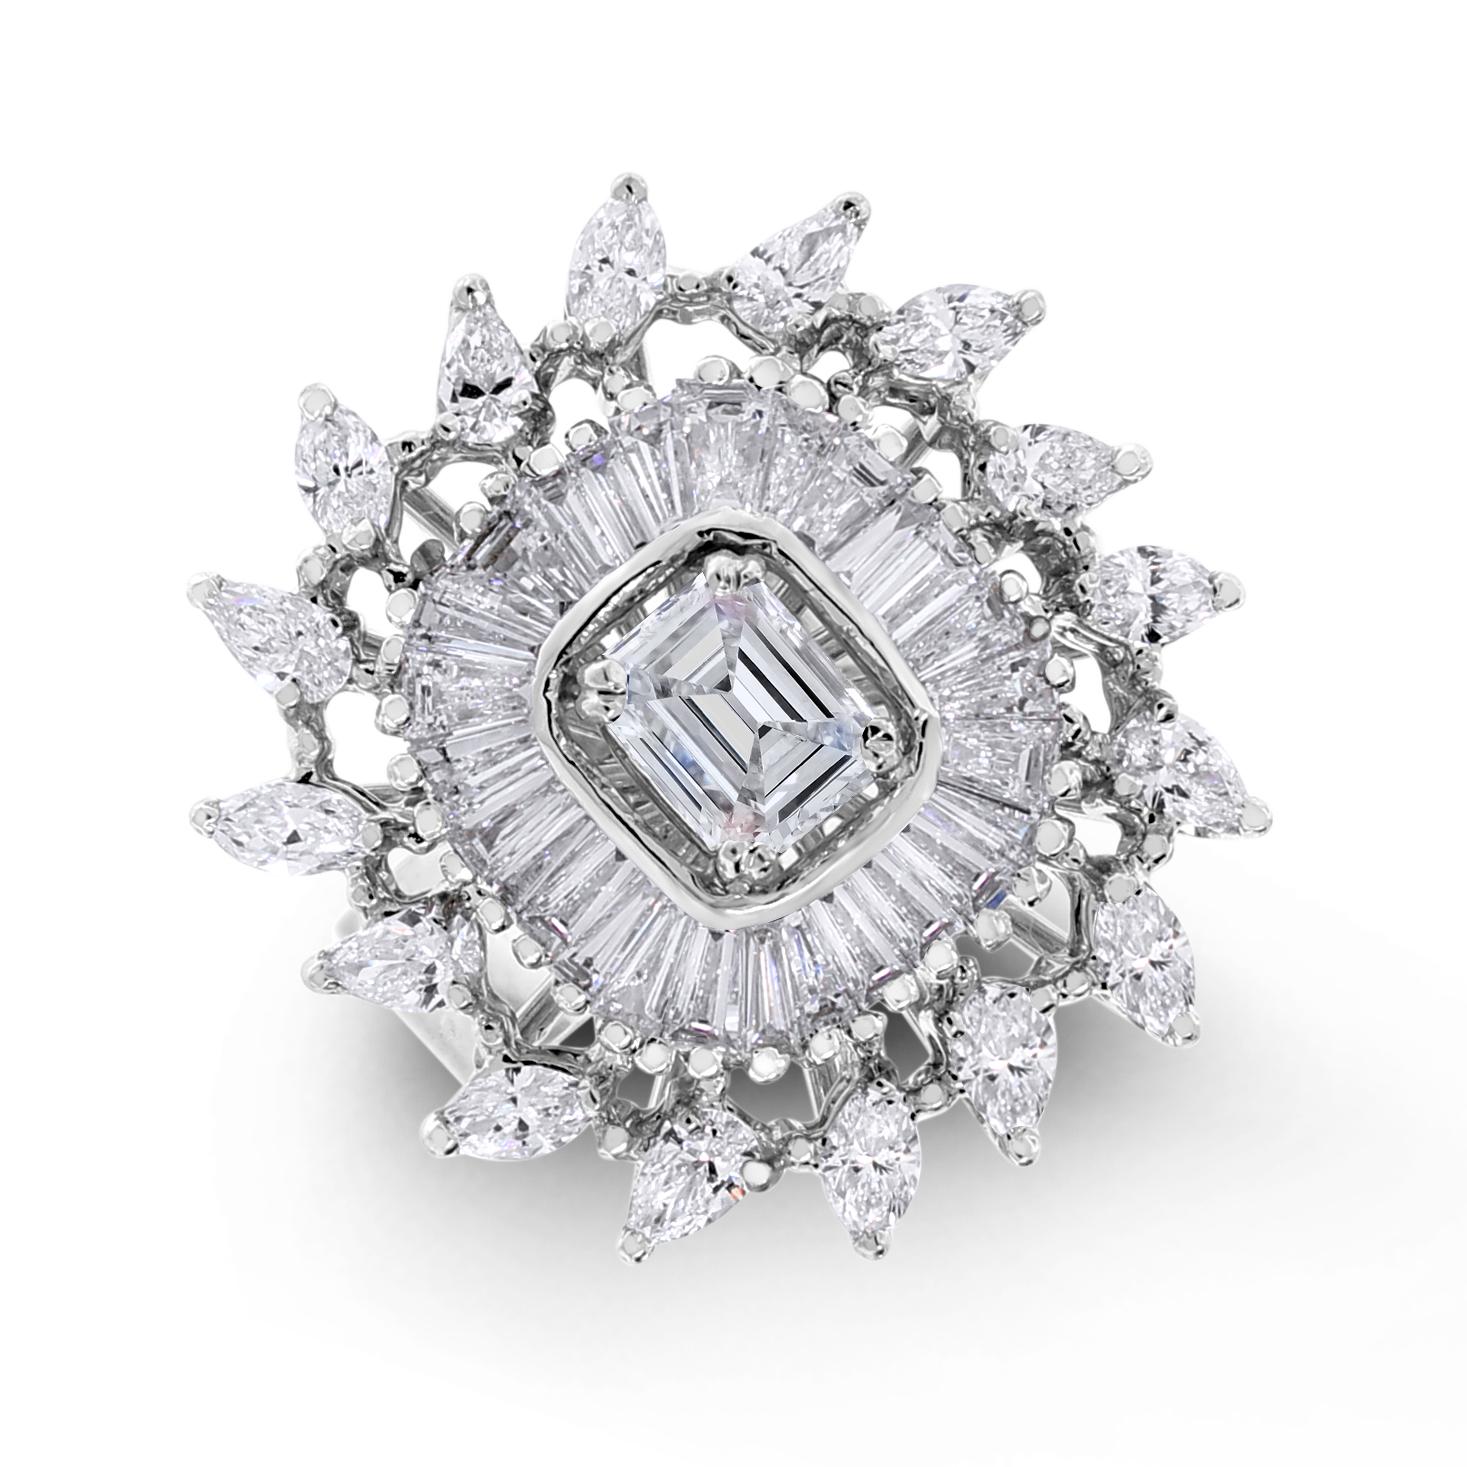 With unique combination of shapes, this diamond ring features concentric halos to create an bold & dramatic effect

Center Diamond Shape: Emerald Cut 
Center Diamond Weight: 0.61 ct 
Diamond Color: G - H 
Diamond Clarity: VS (Very Slightly Included)